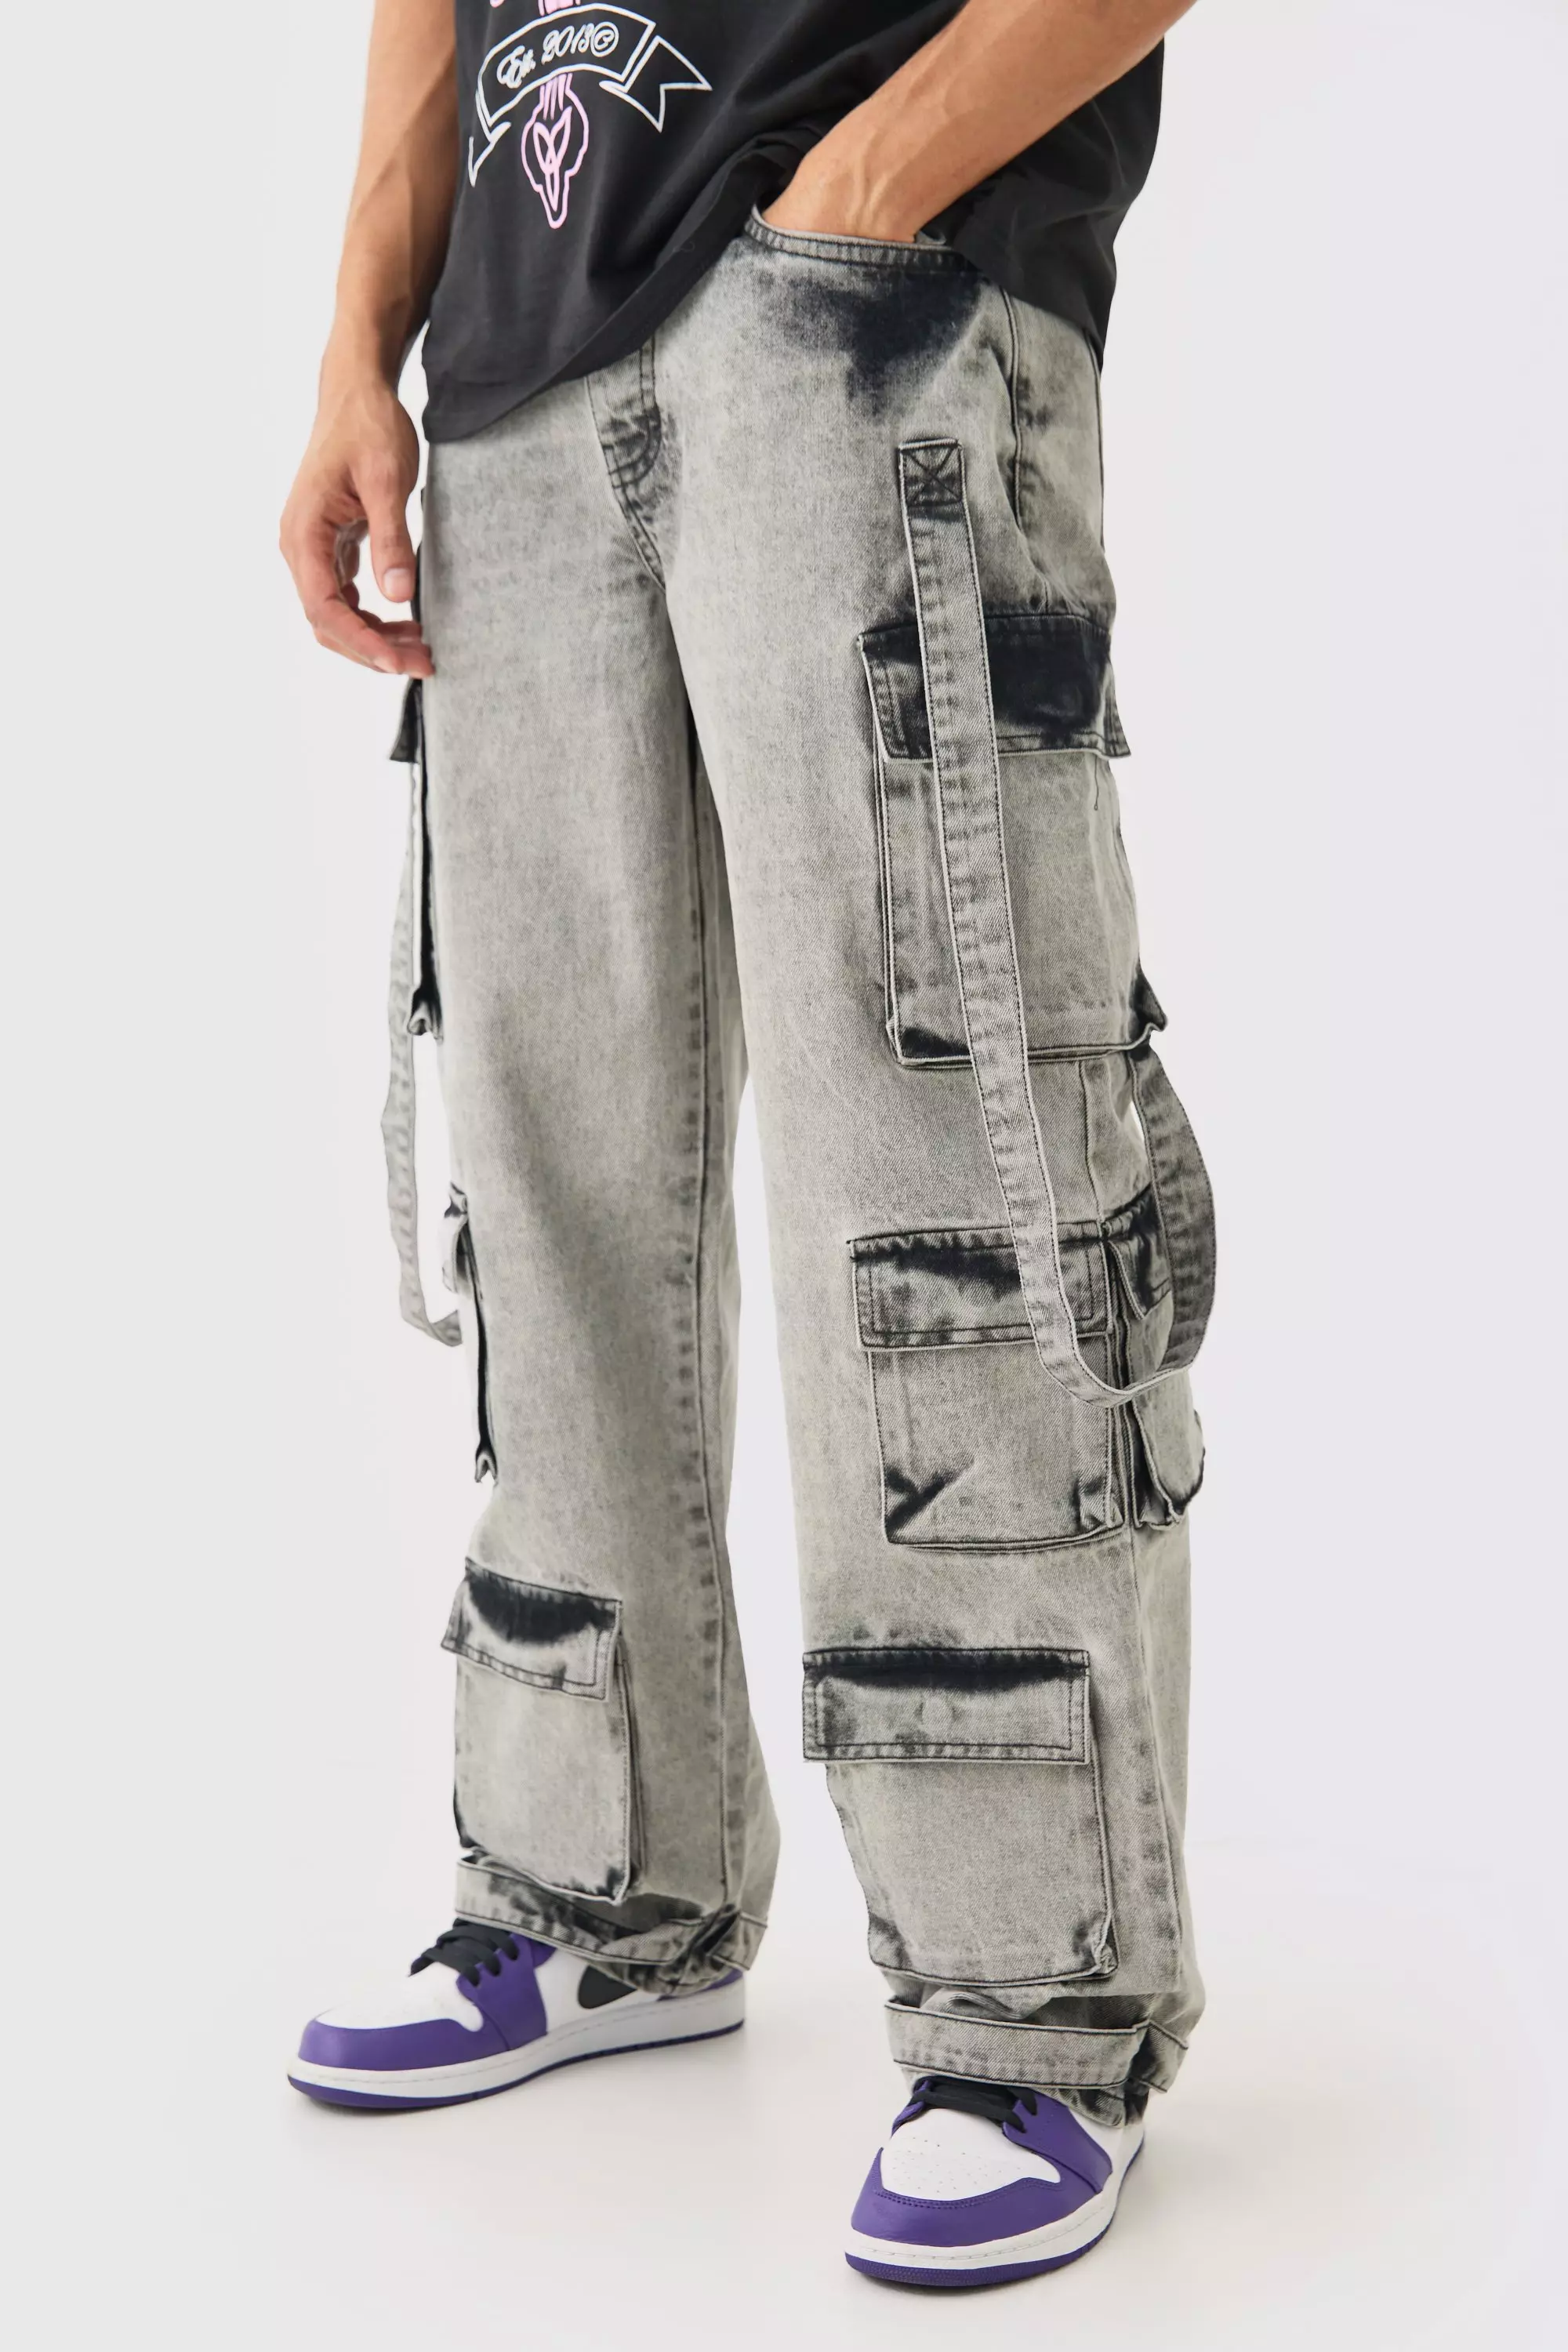 Grey Baggy Rigid Multi Pocket Flare Acid Washed Jeans In Charcoal